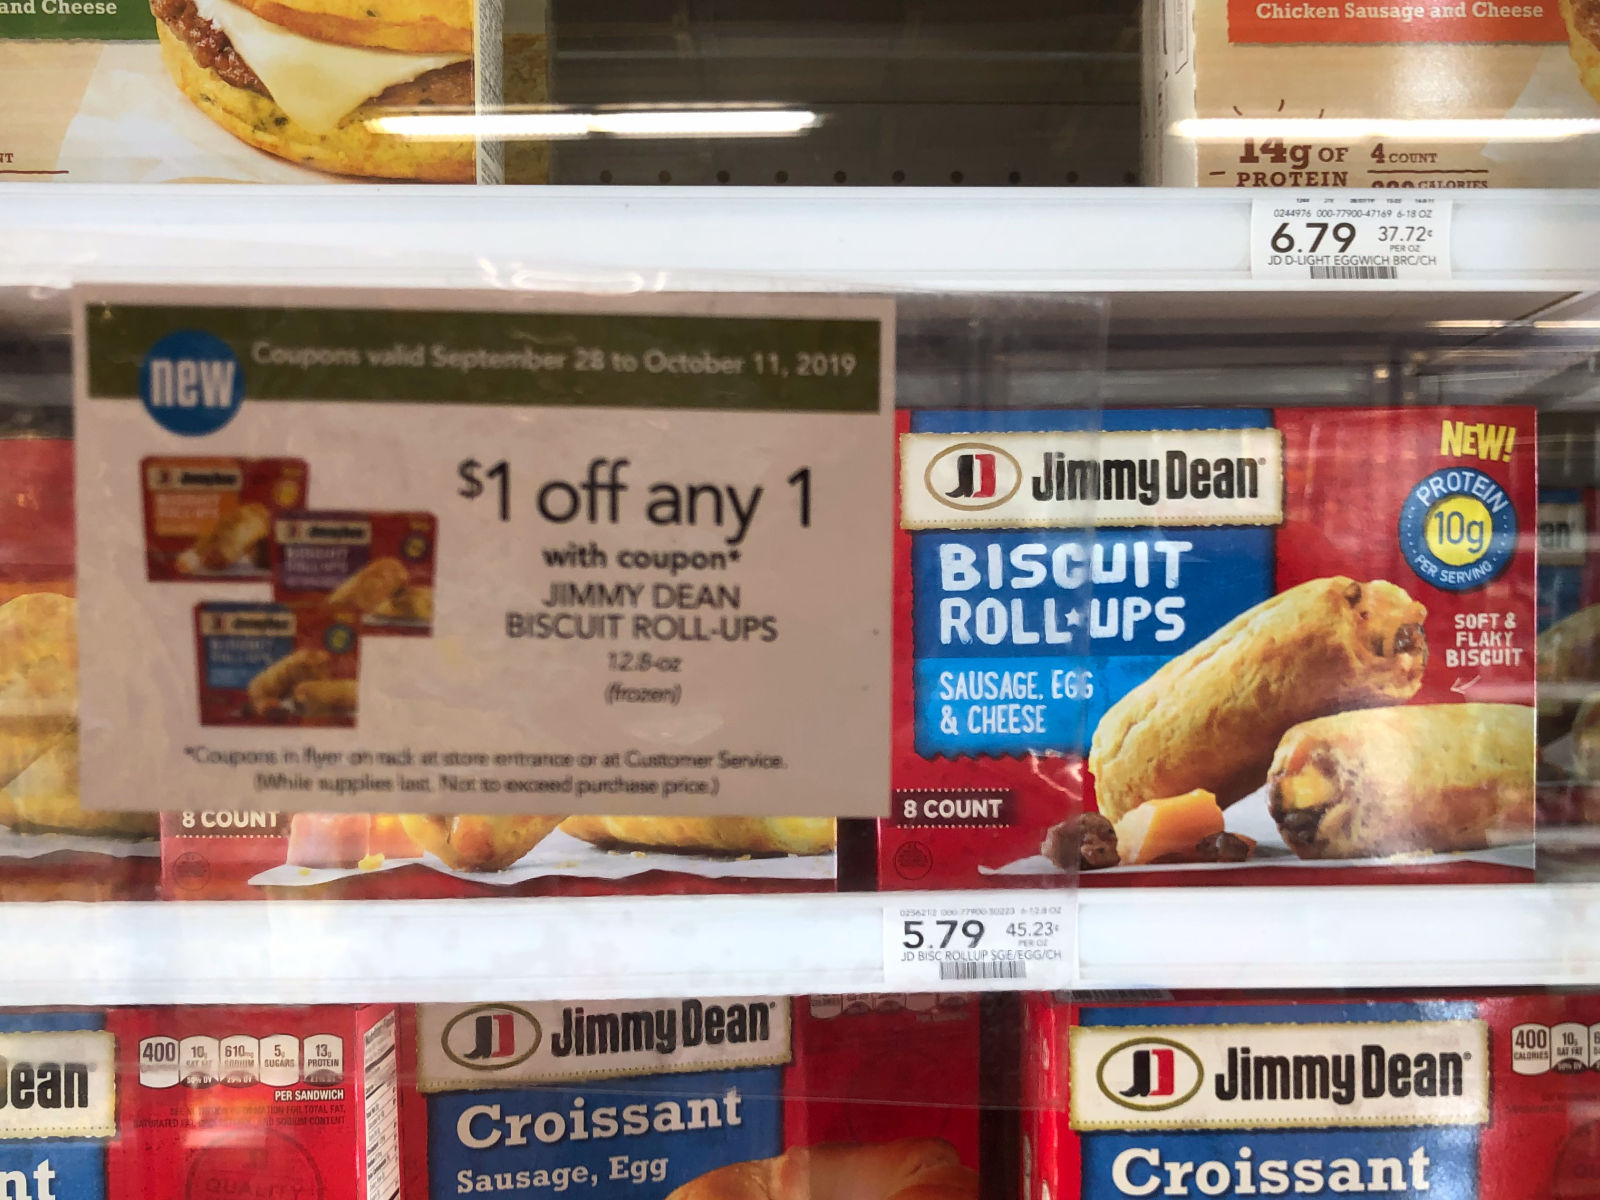 Super Deal On NEW Jimmy Dean Biscuit Roll-Ups Available Now At Publix on I Heart Publix 3